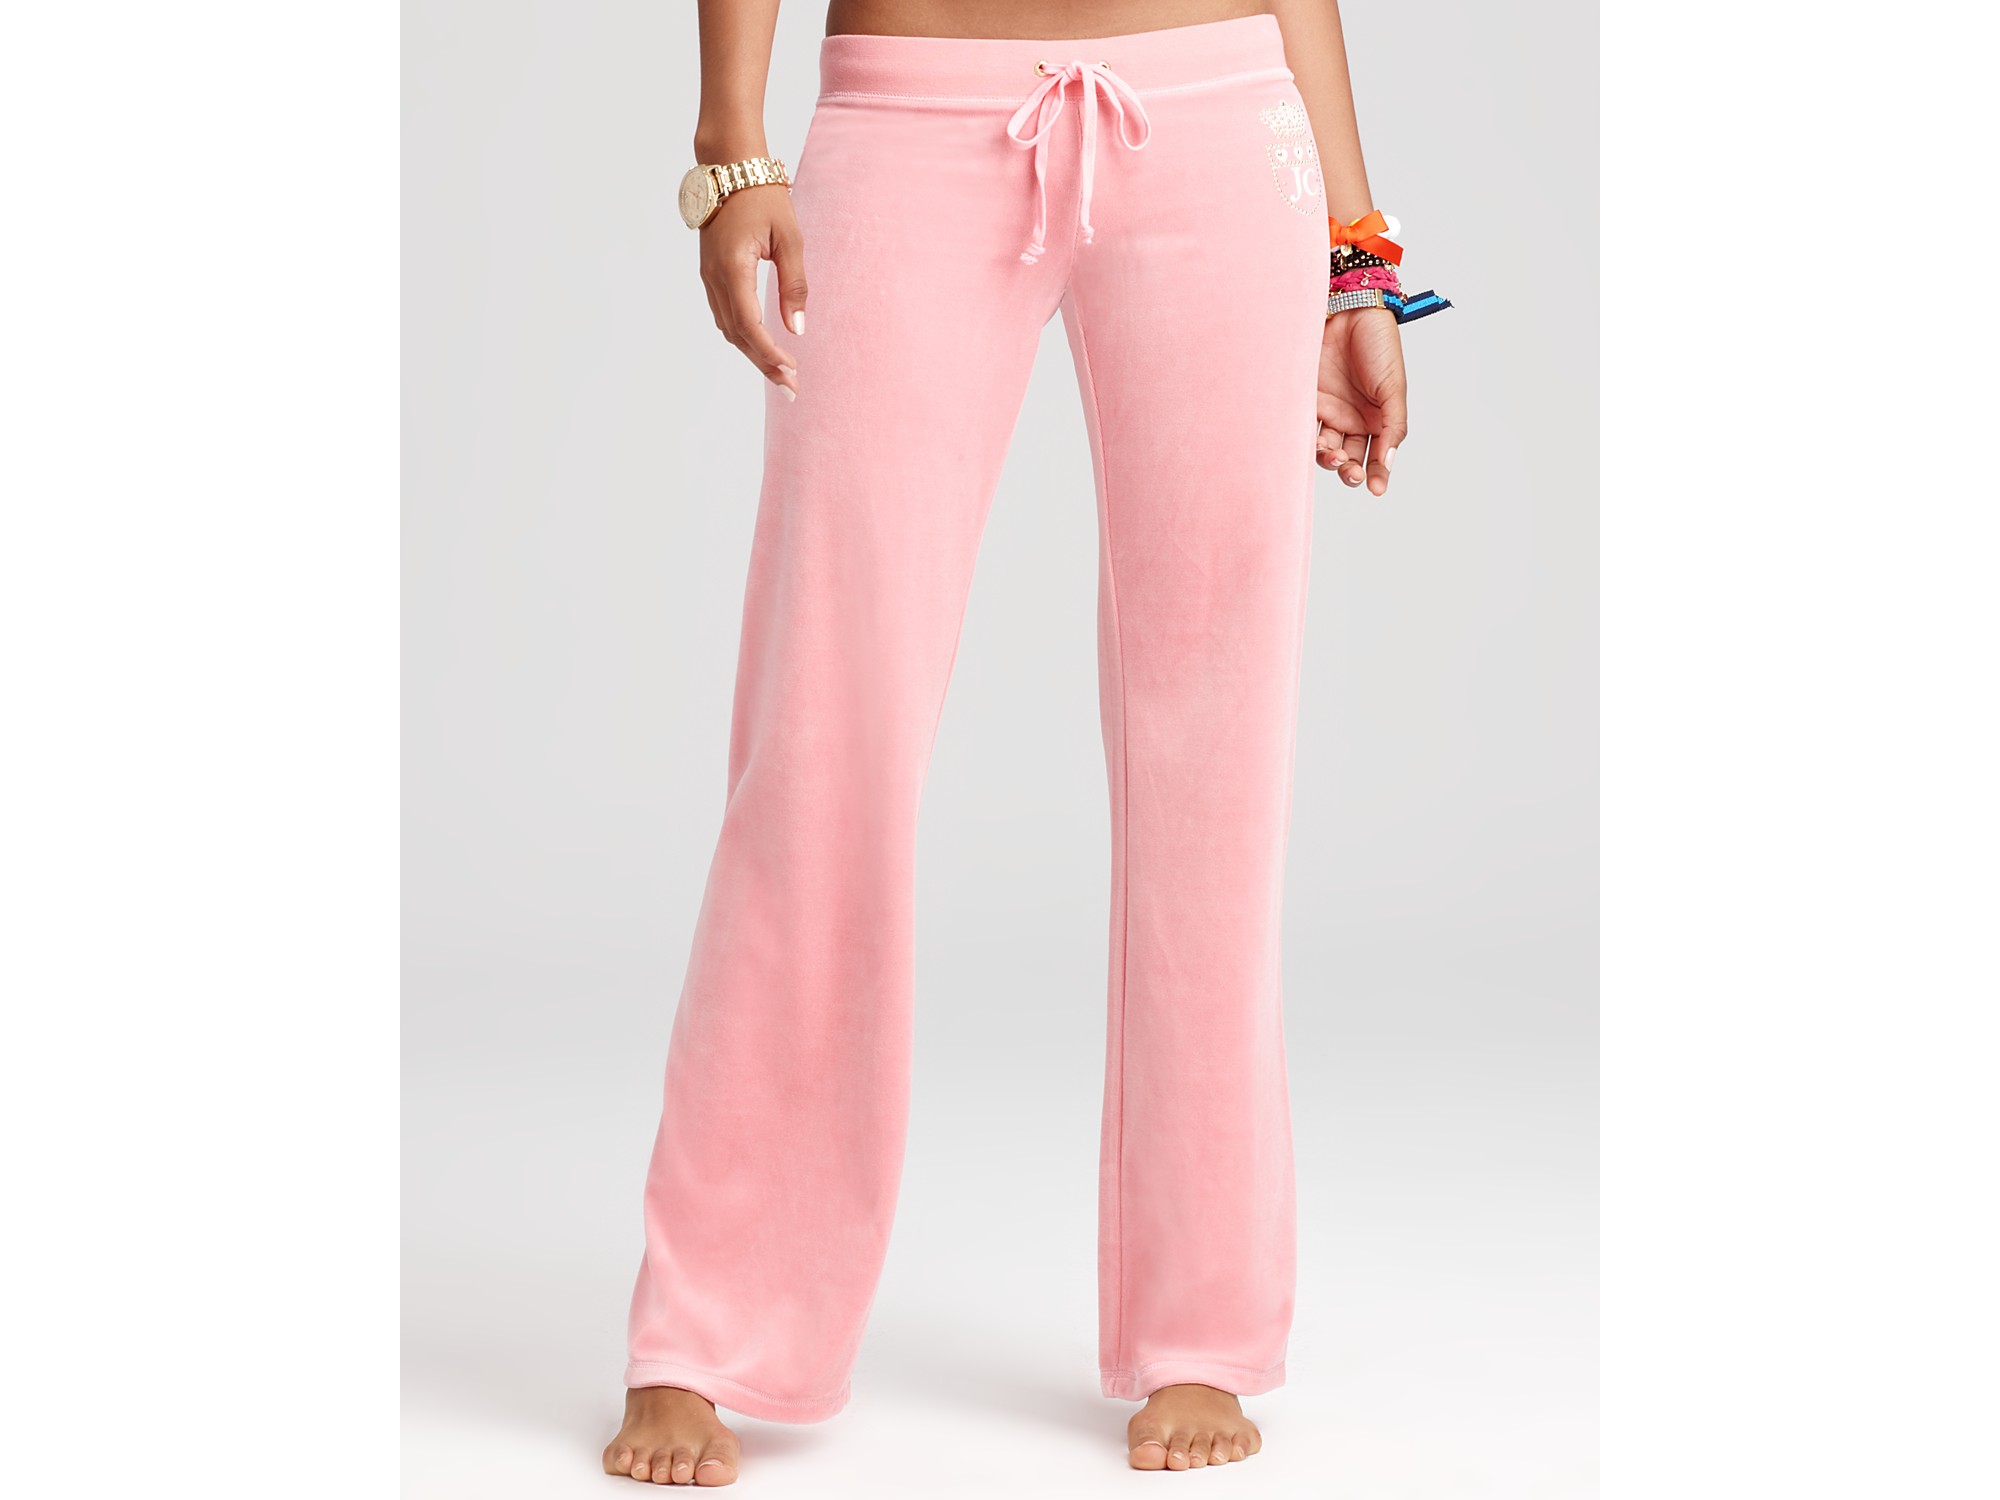 Lyst - Juicy Couture Original Leg Velour Pants with Rhinestones in Pink